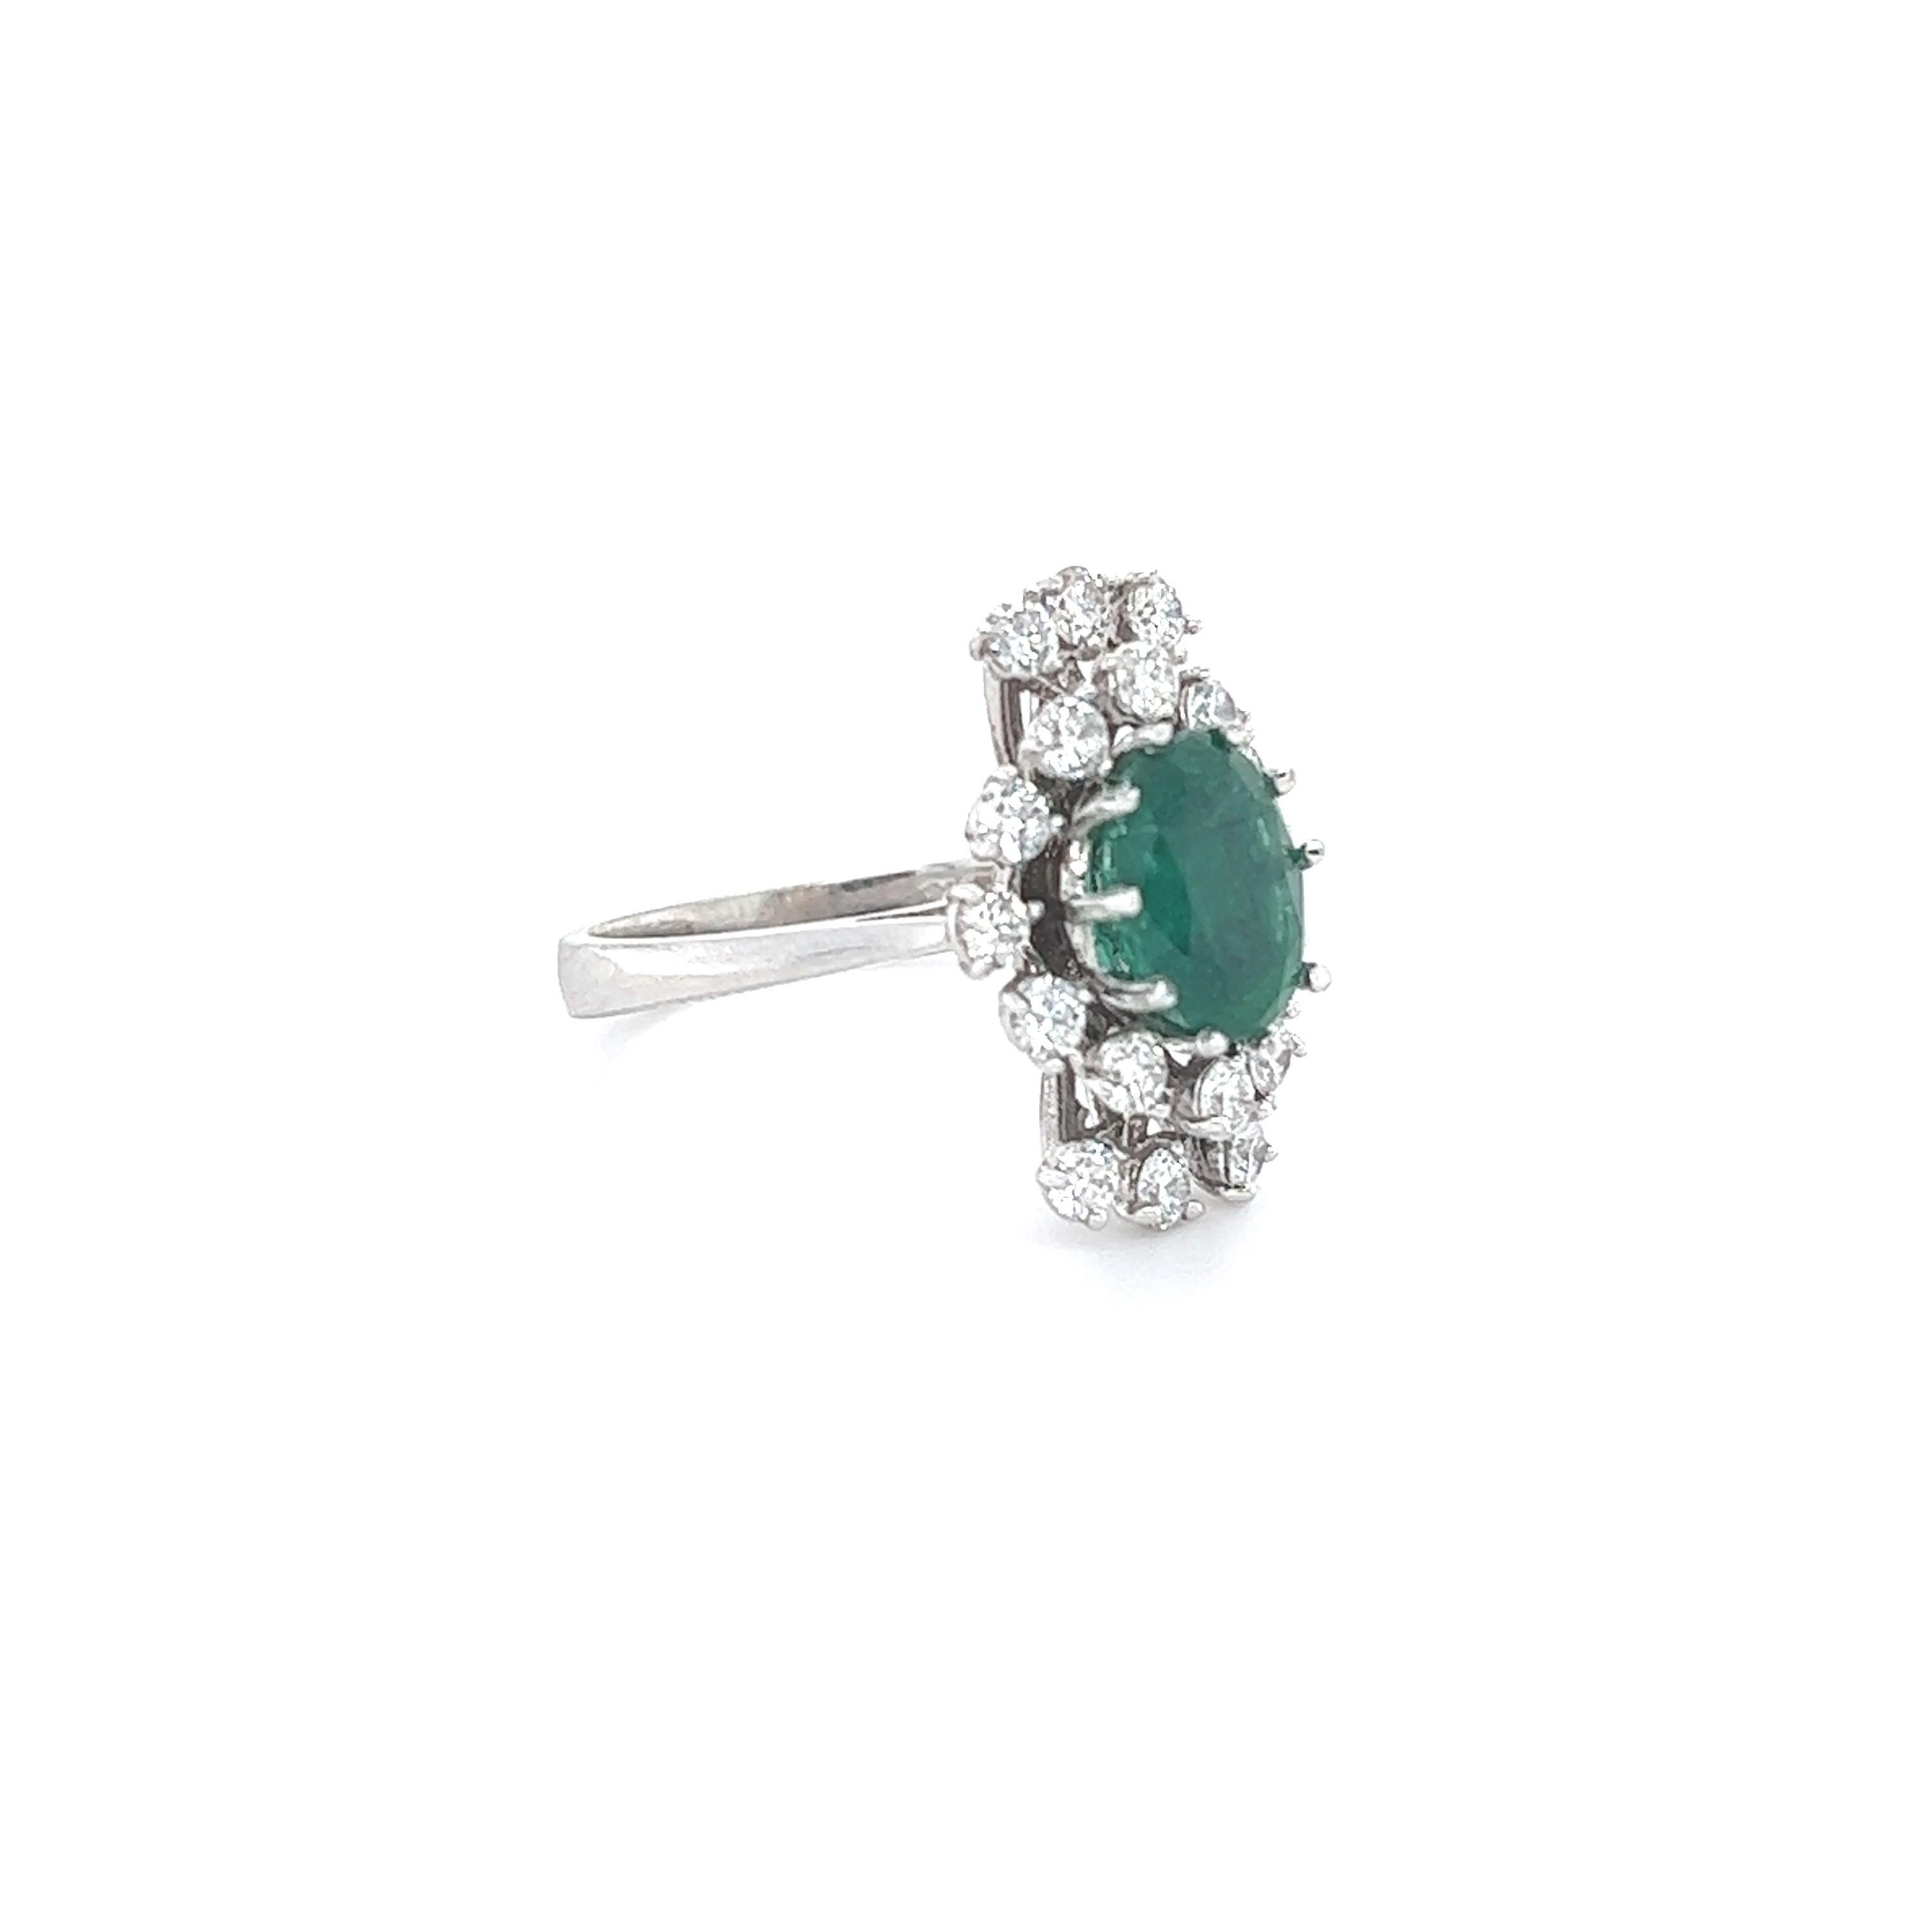 This ring has a 2.01 Carat Oval Cut Emerald and is surrounded by 18 Round Cut Diamonds that weighs 0.91 Carats. (Clarity: SI1, Color: F) The total carat weight of the ring is 2.92 carats. 
The Oval Cut Emerald measures at approximately 9 mm x 7 mm.